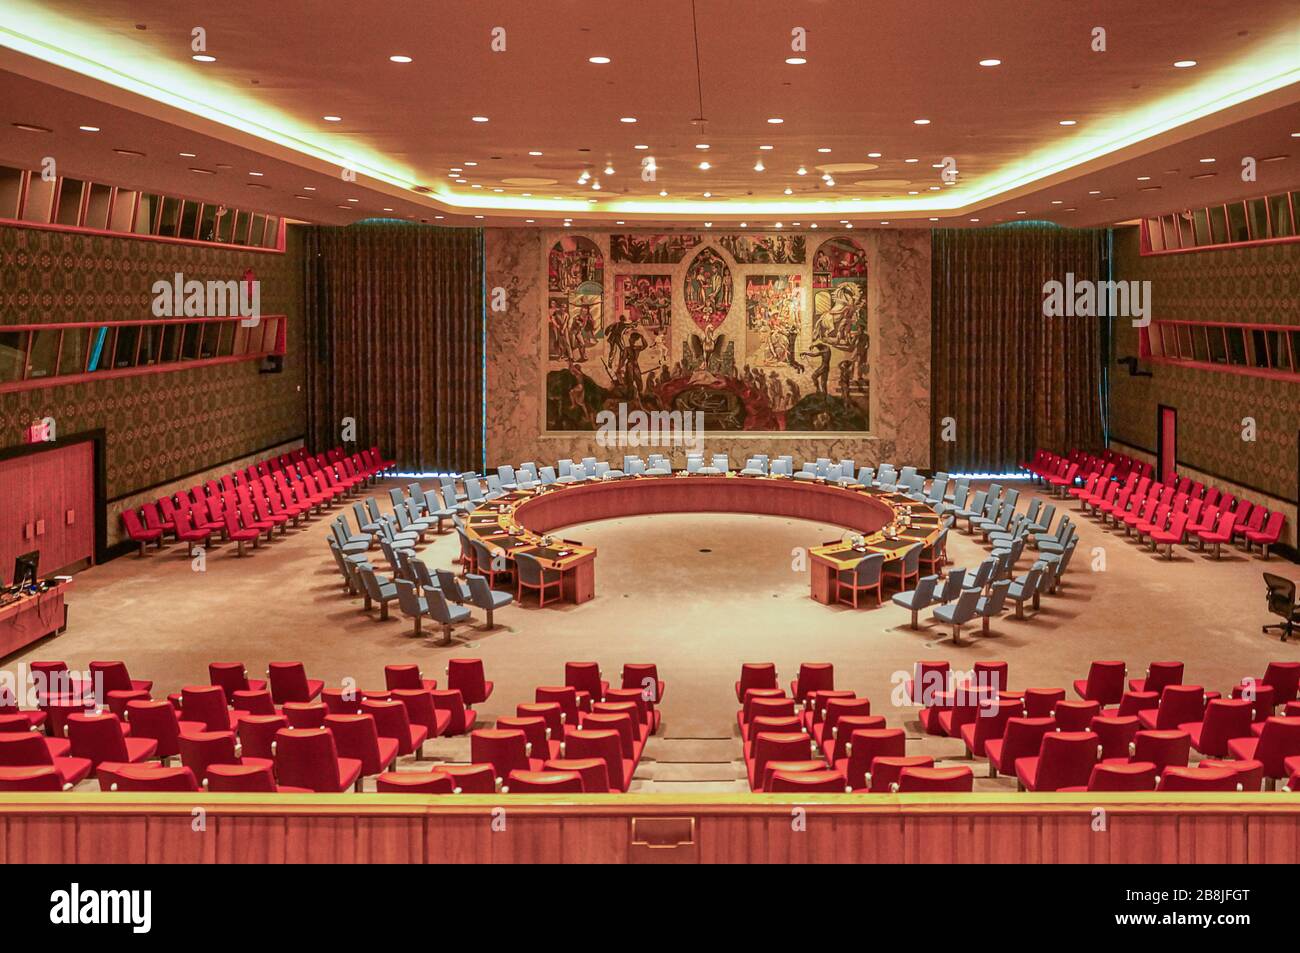 NEW YORK CITY, 2013, Sept, 11: The Security Council Chamber during preparation for session. It is located in the United Nations Conference Building. Stock Photo